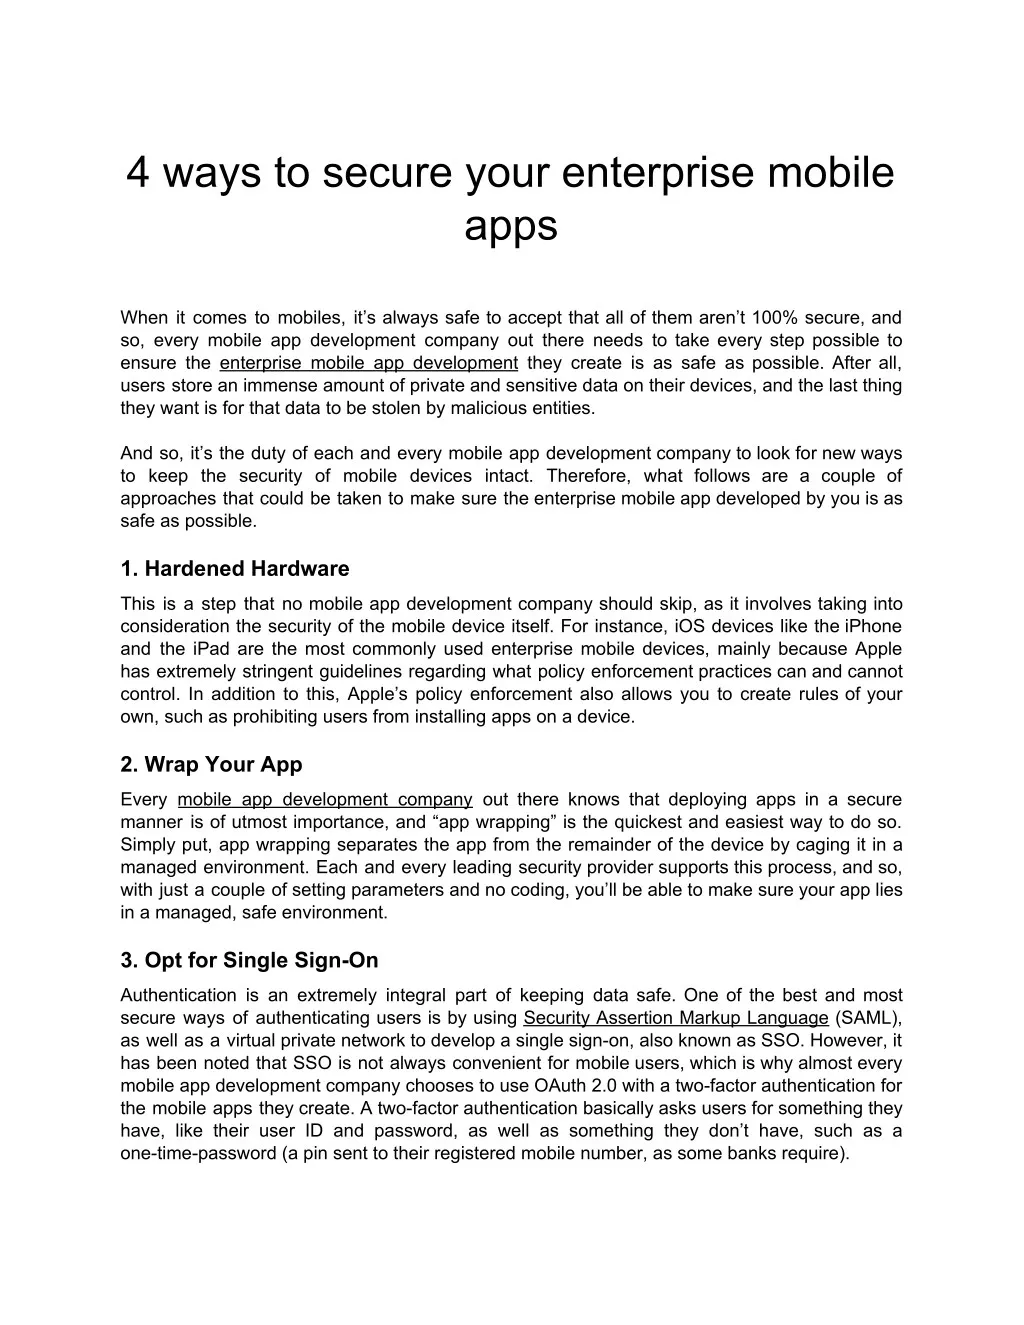 4 ways to secure your enterprise mobile apps